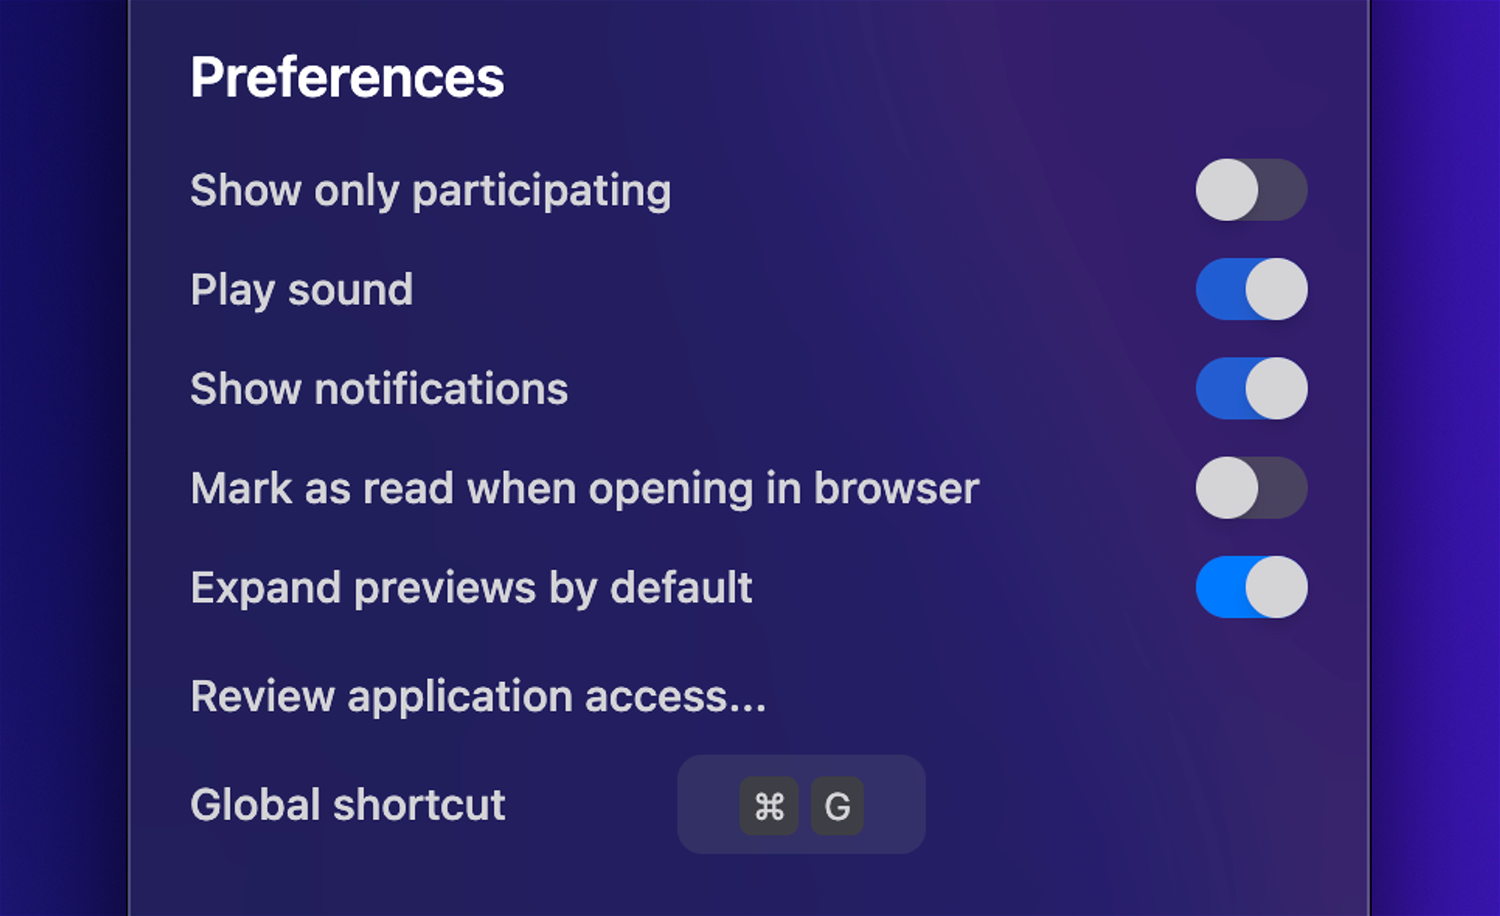 Expand previews by default. Part of a Preferences UI update.